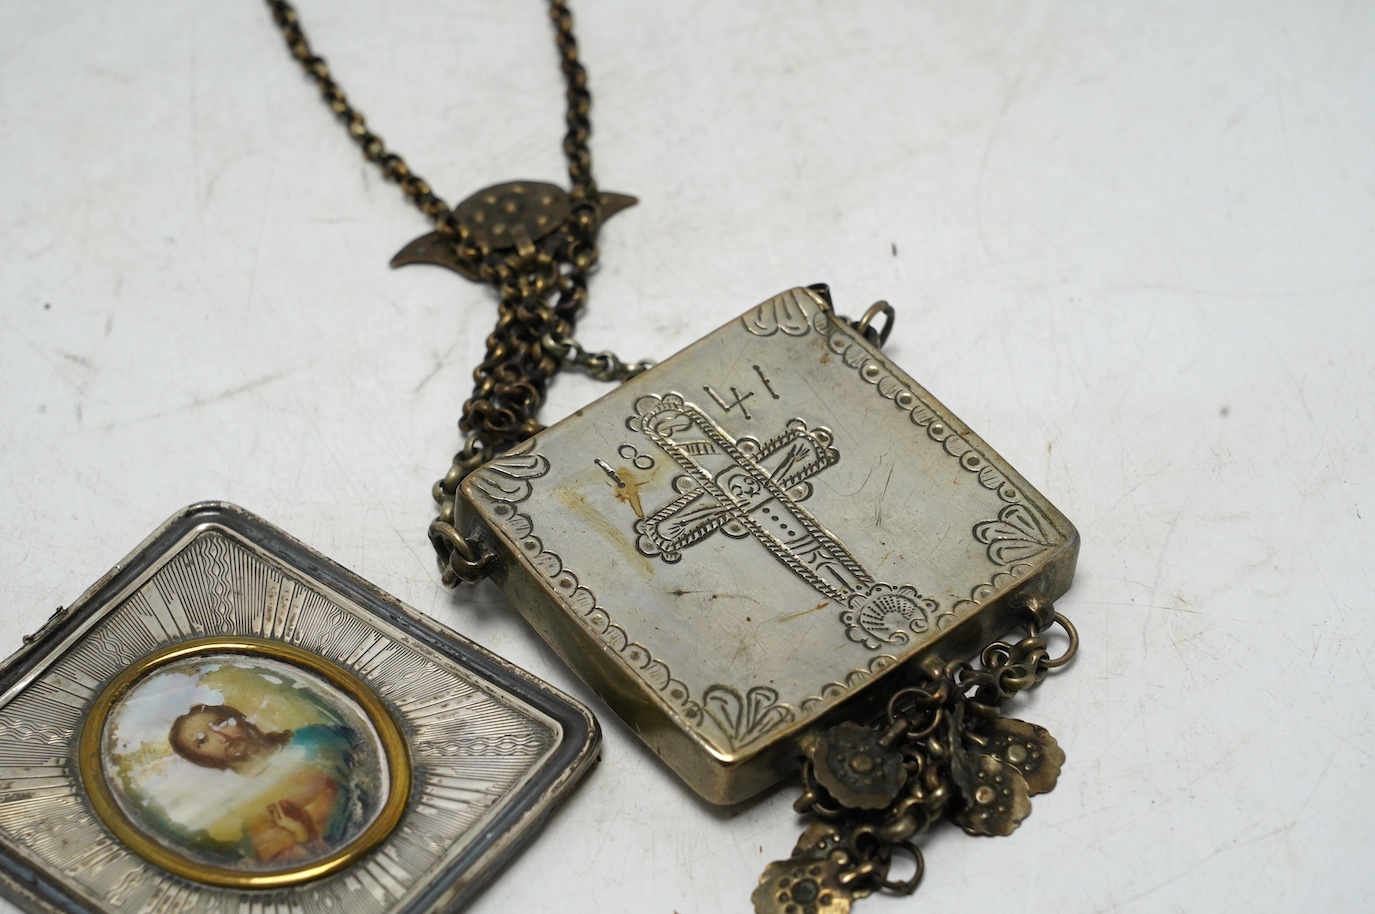 A Greek white metal pendant, embossed with St. George and the dragon, on a chain and a Russian white metal framed portrait of Christ. Condition - poor to fair